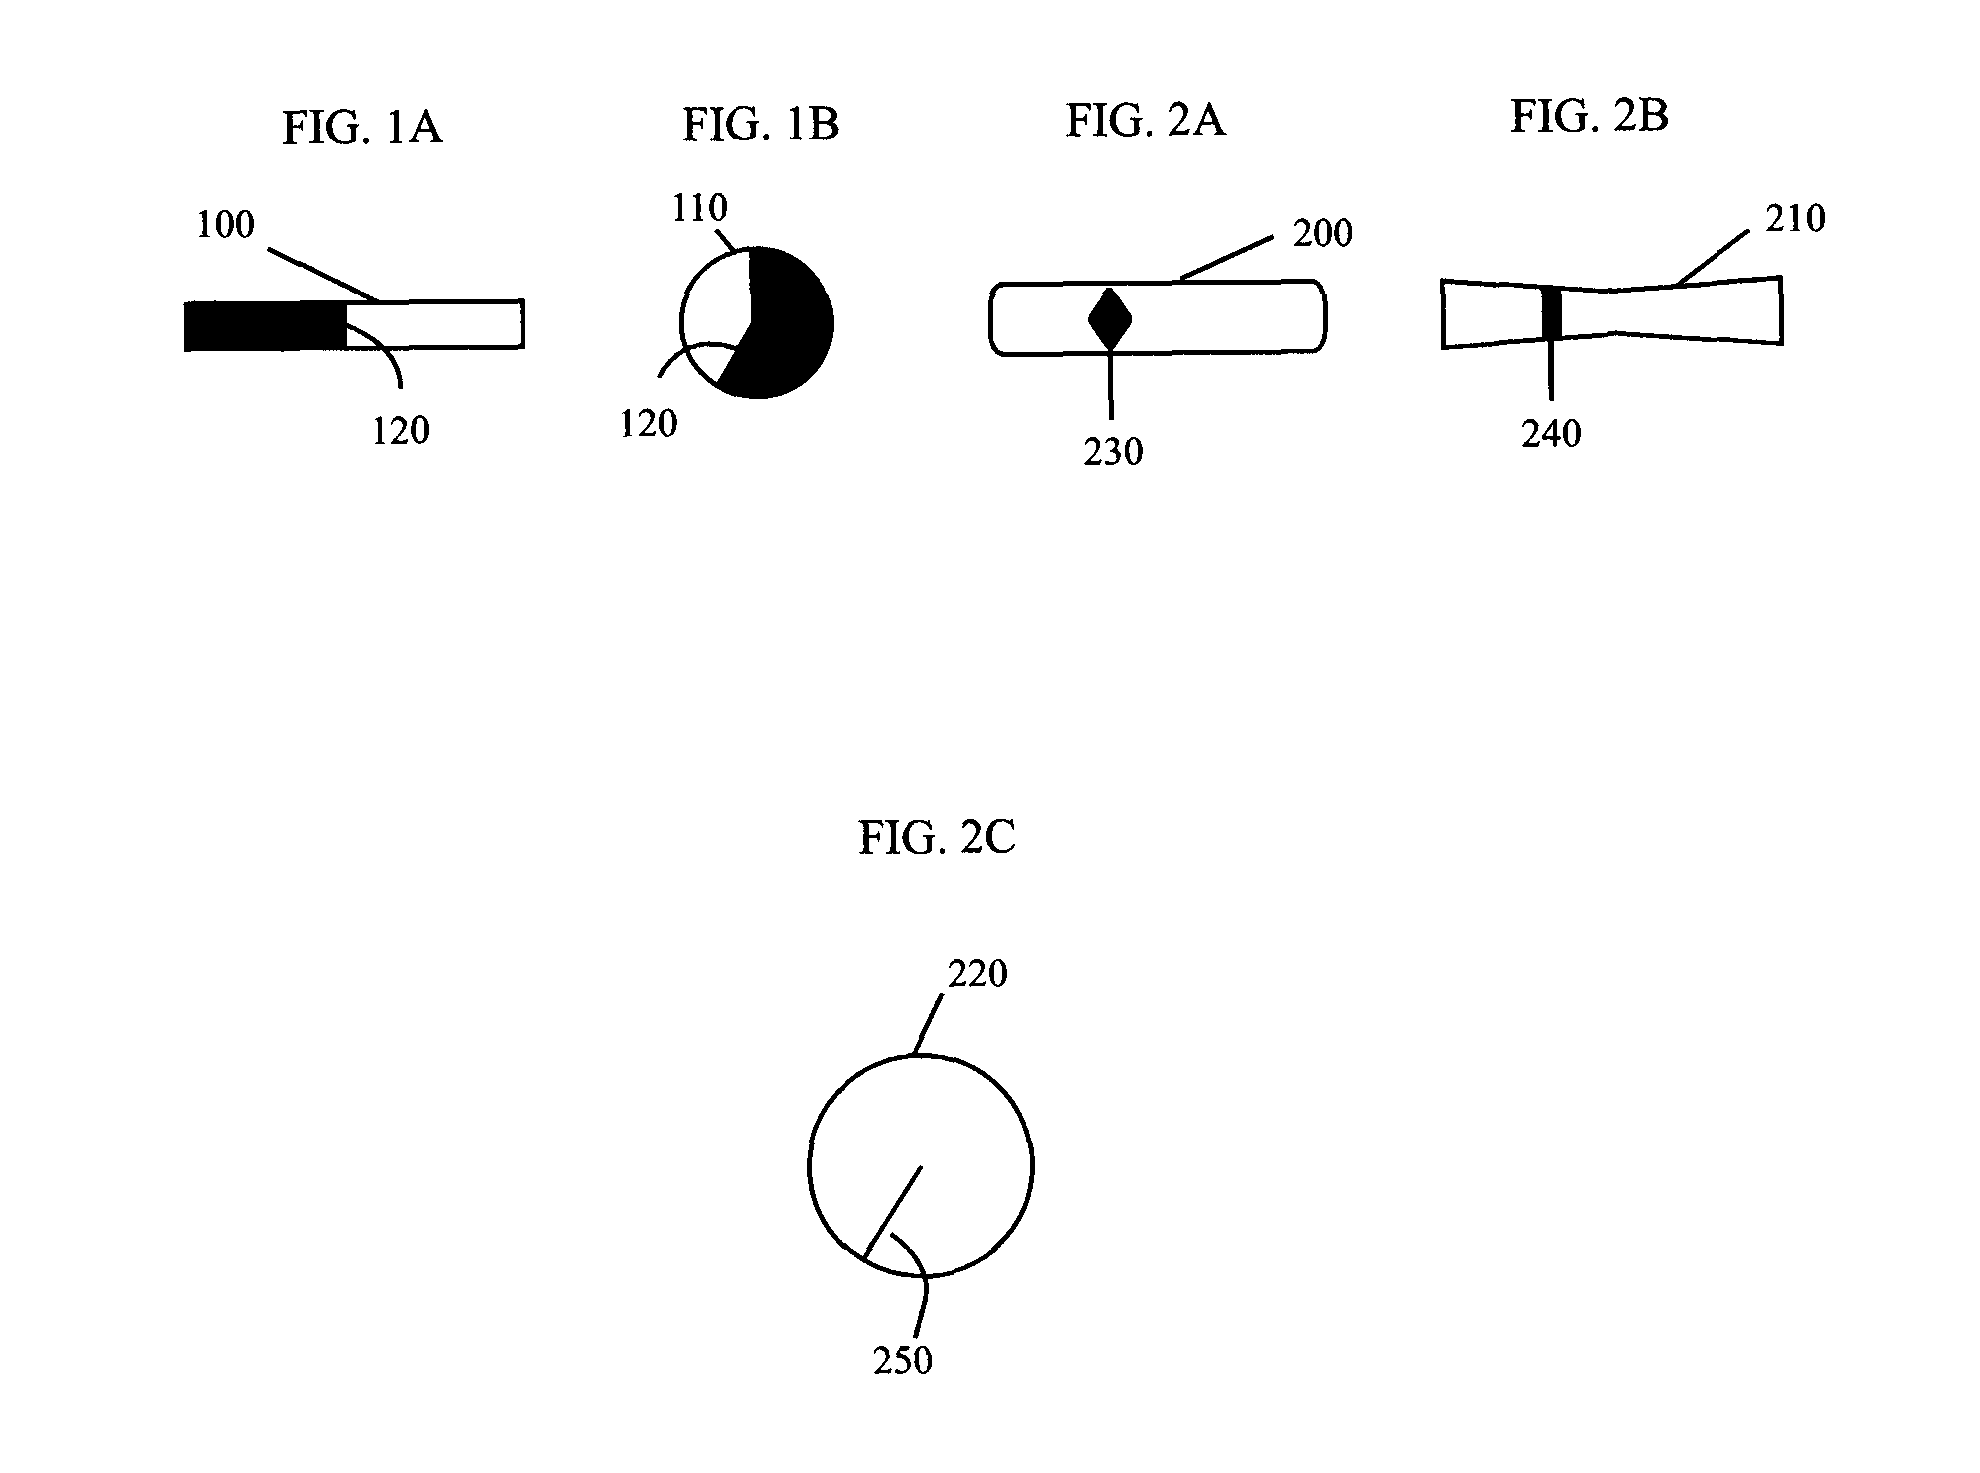 Time display, method of presenting time information and timekeeping devices